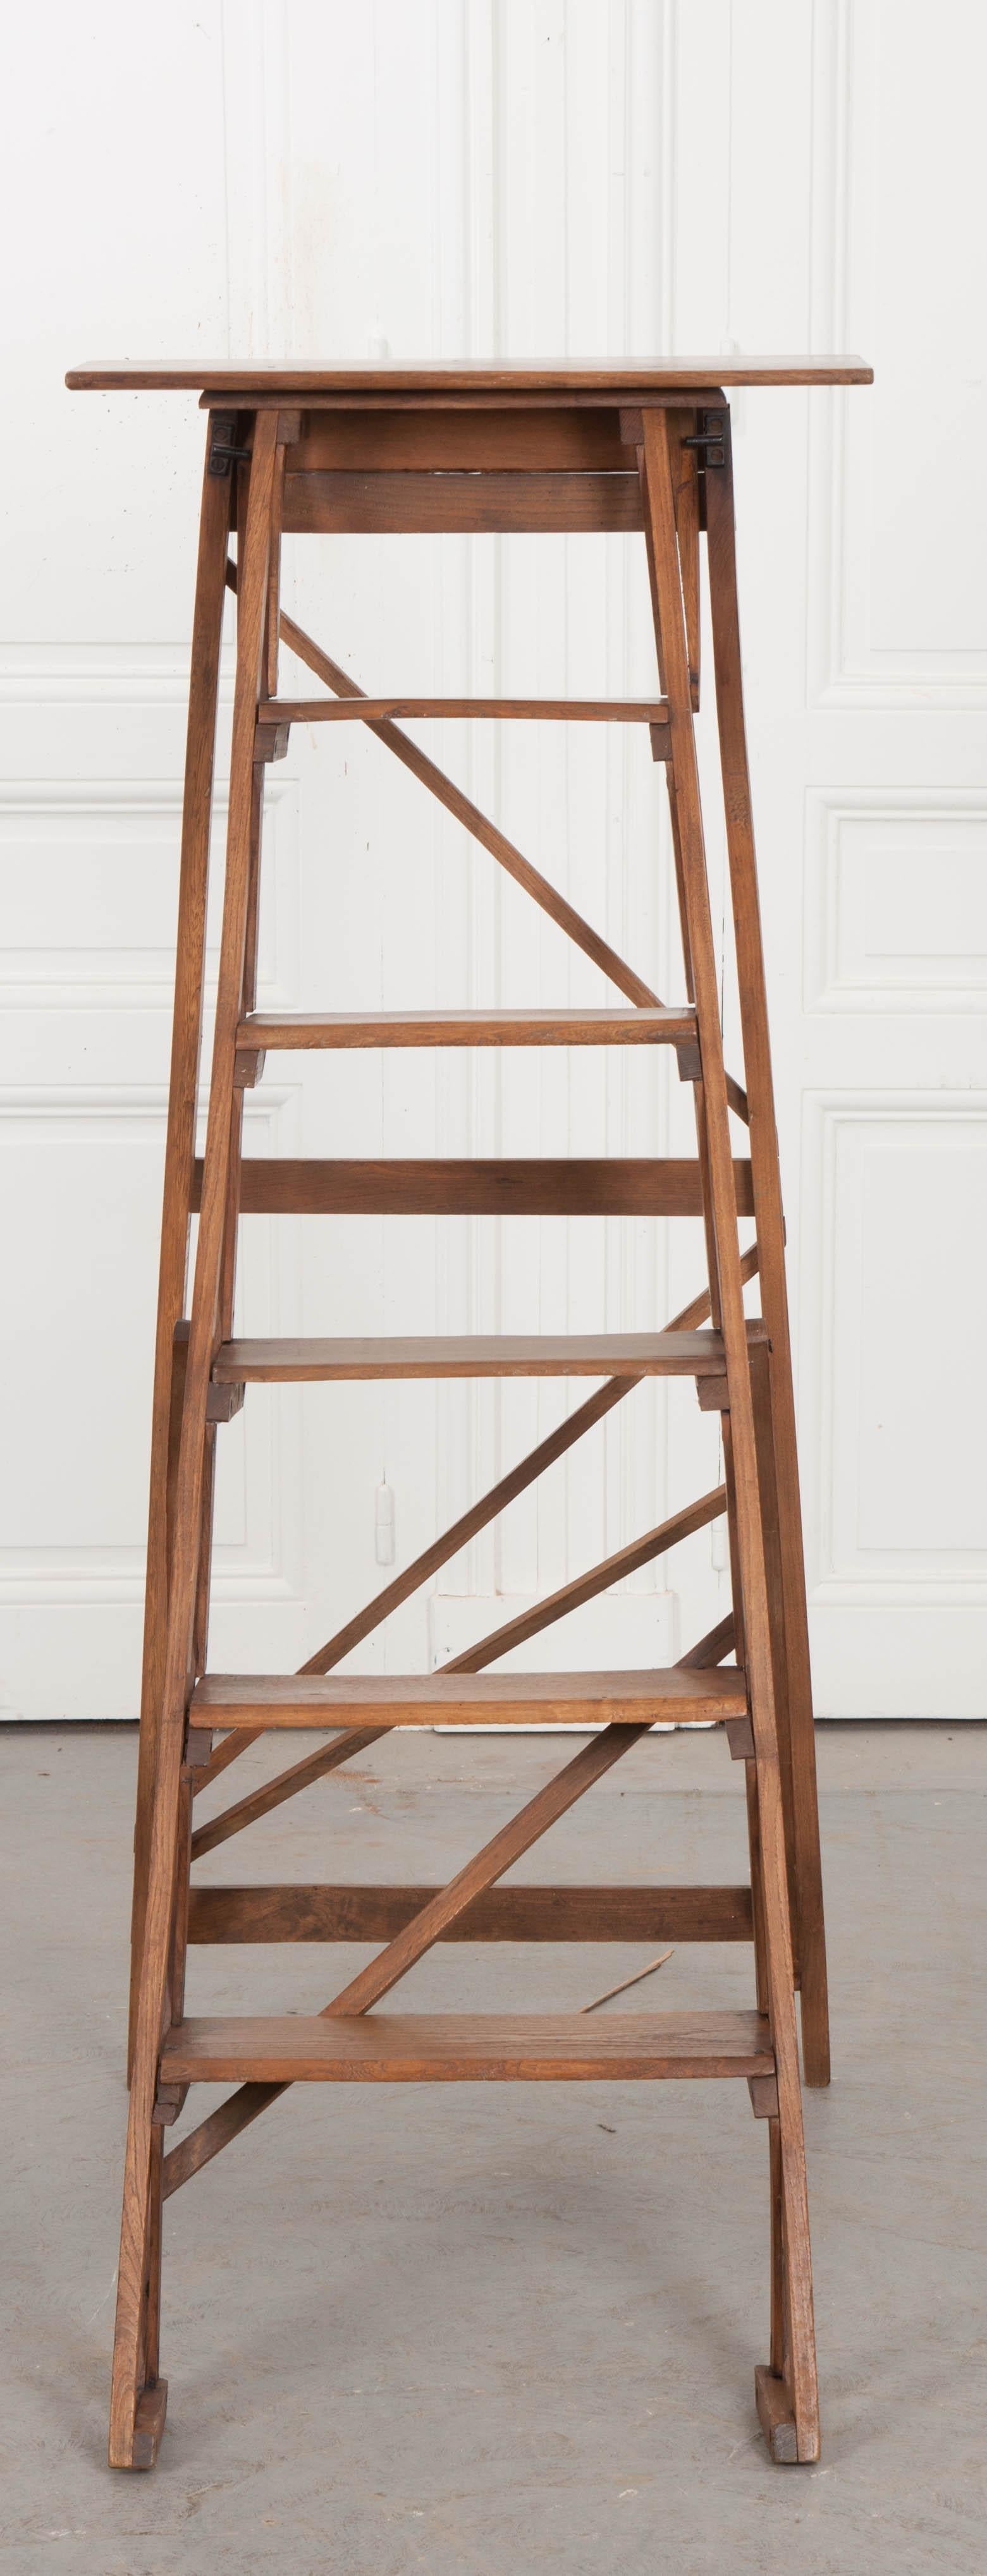 An exceptional antique folding ladder from 1900s France. The oak ladder has five steps that are graduated in size. When opened, the ladder measures 53 1/4? H. The lightly-toned oak used to construct the antique has taken a lovely patina over the